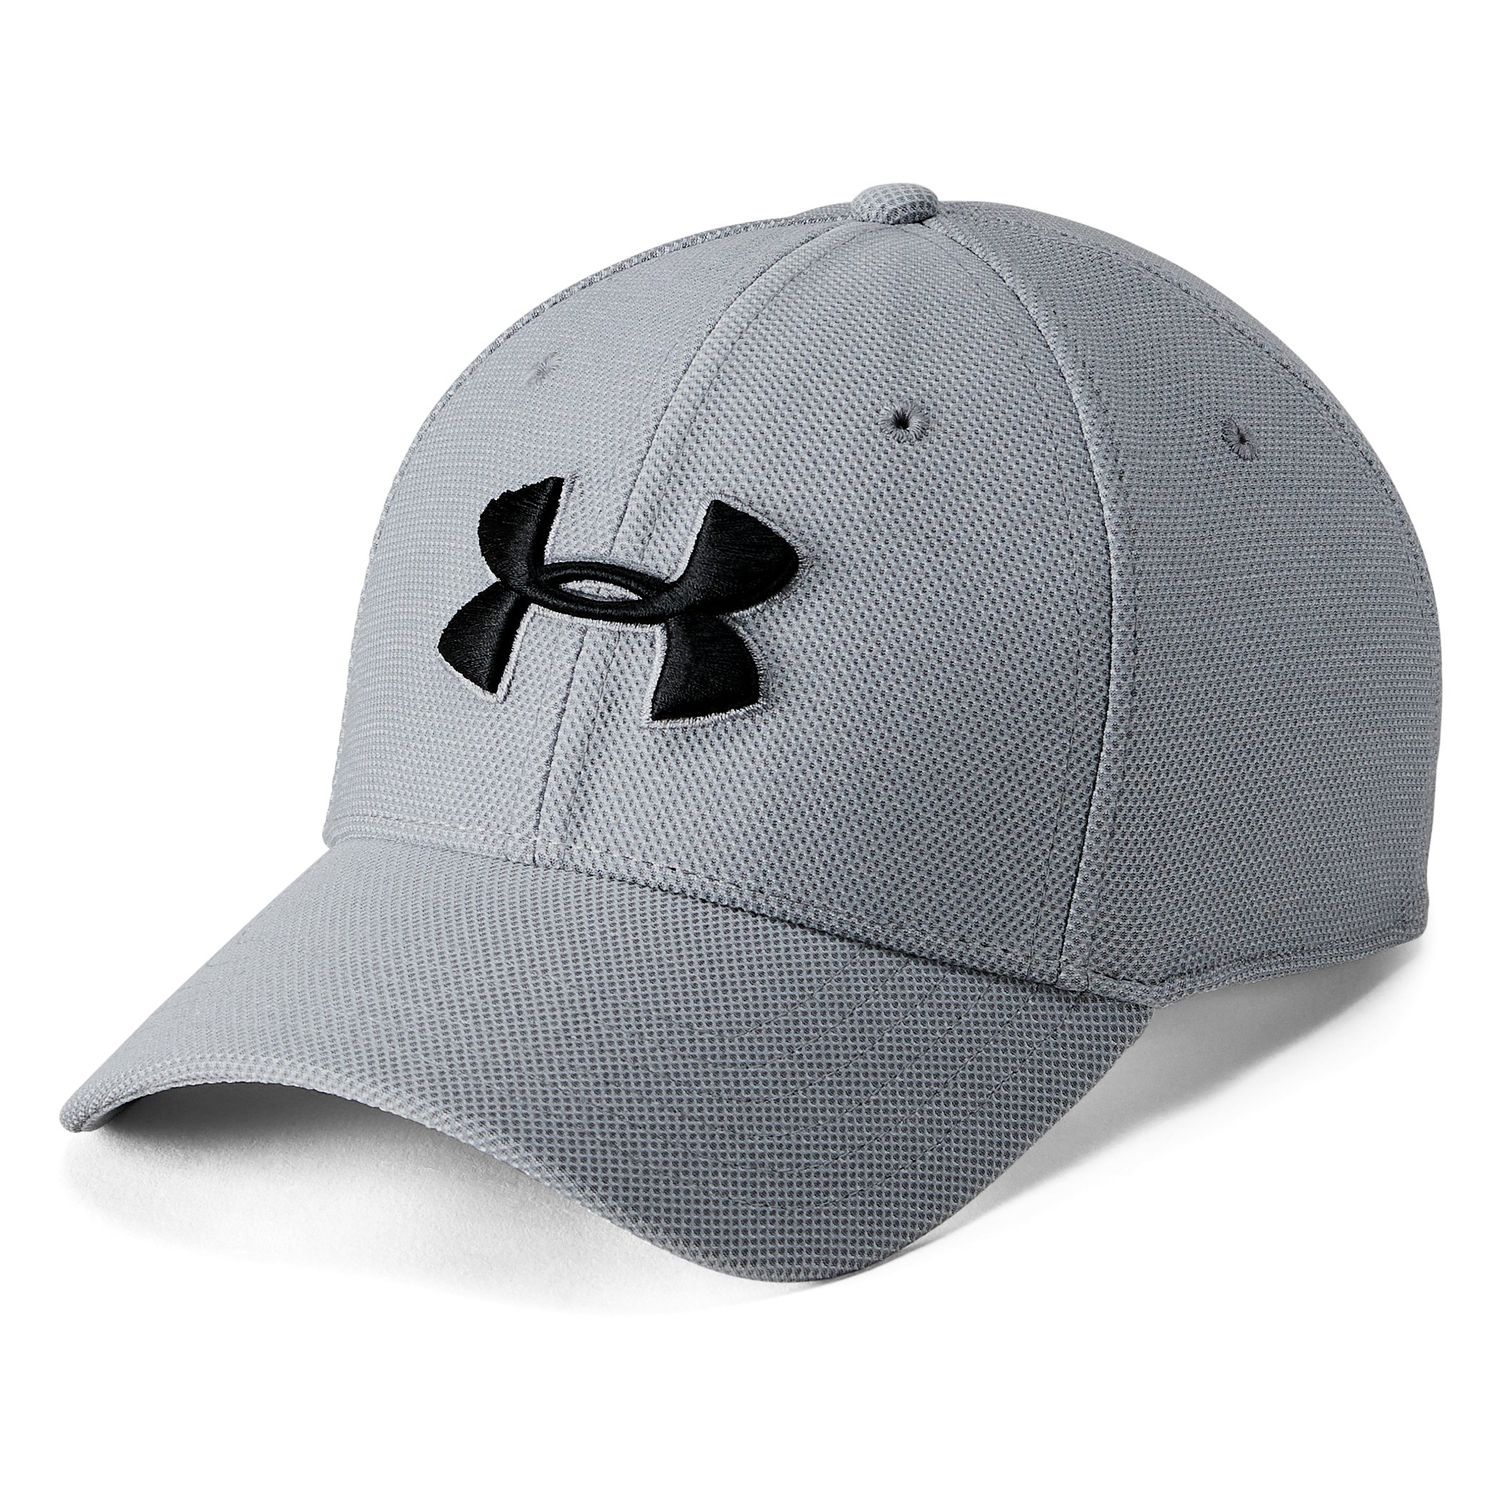 Under Armour Hats for Men | Kohl's